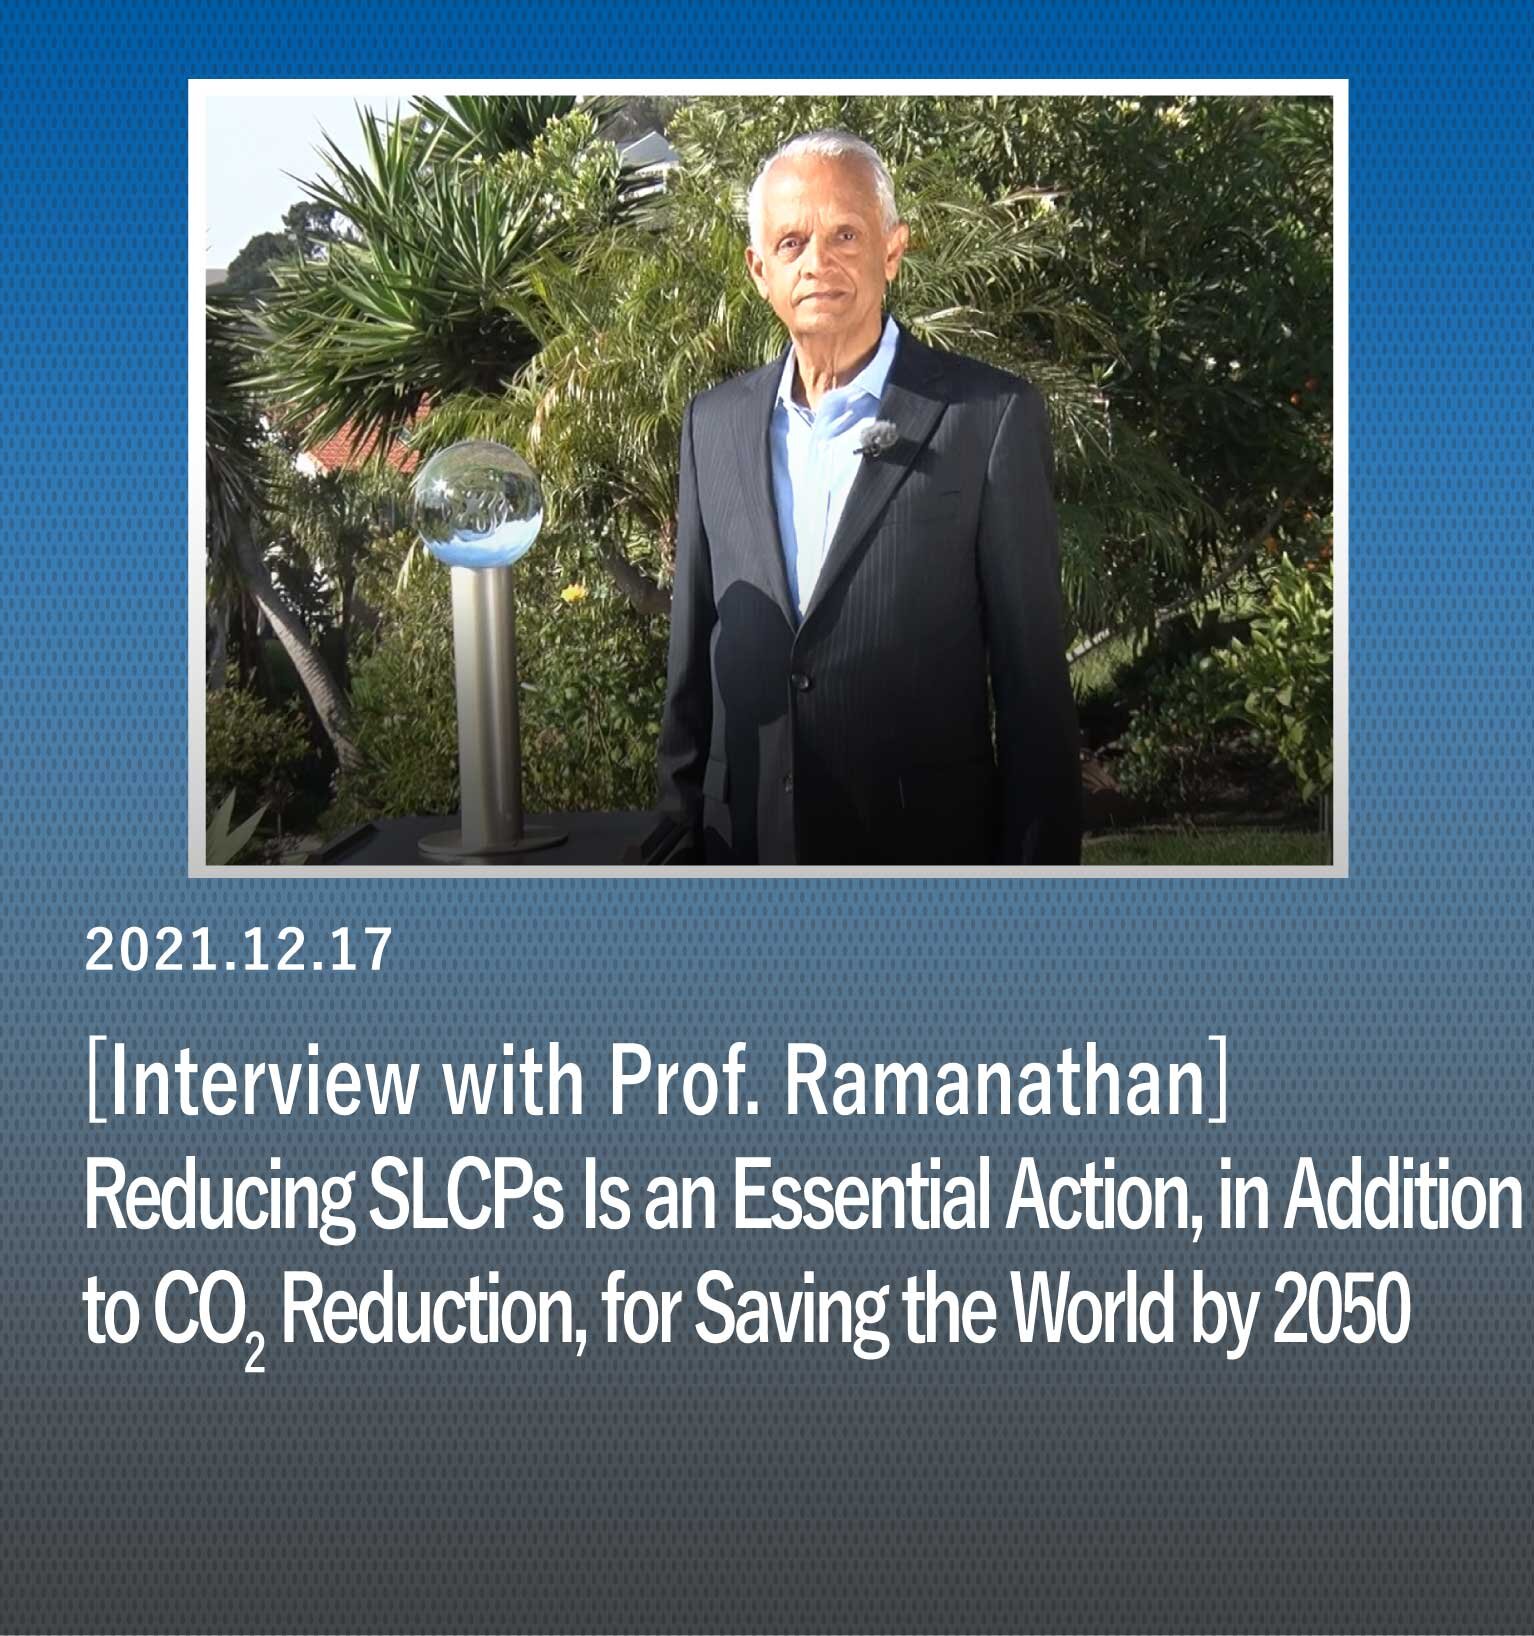 "Reducing Short-Lived Climate Pollutants (SLCPs) Is an Essential Action, in Addition to CO<sub>2</sub> Reduction, for Saving the World by 2050" Interview with Prof. Ramanathan, Winner of the 2021 Blue Planet Prize